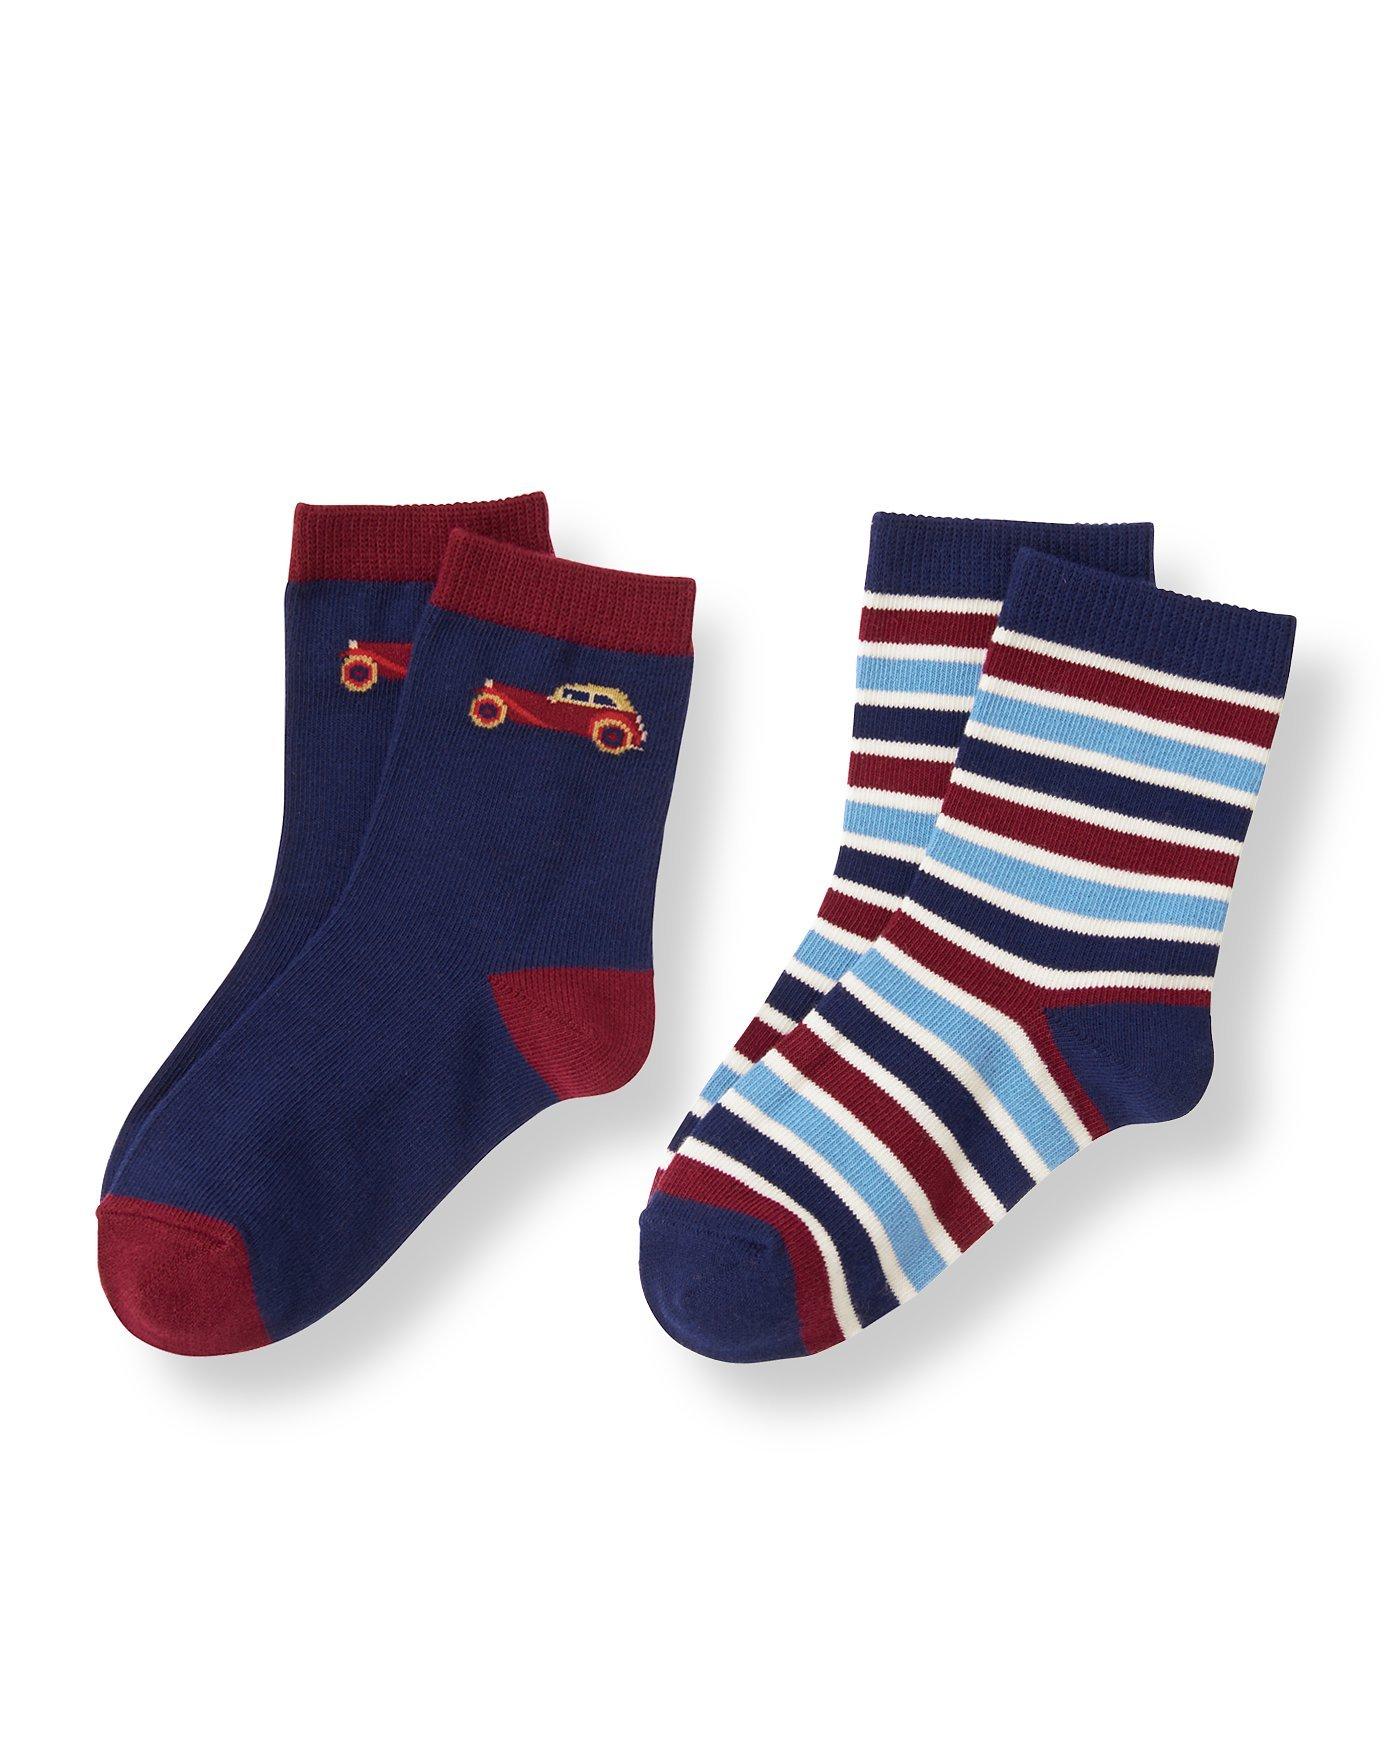 Auto Stripe Sock Two-Pack image number 0